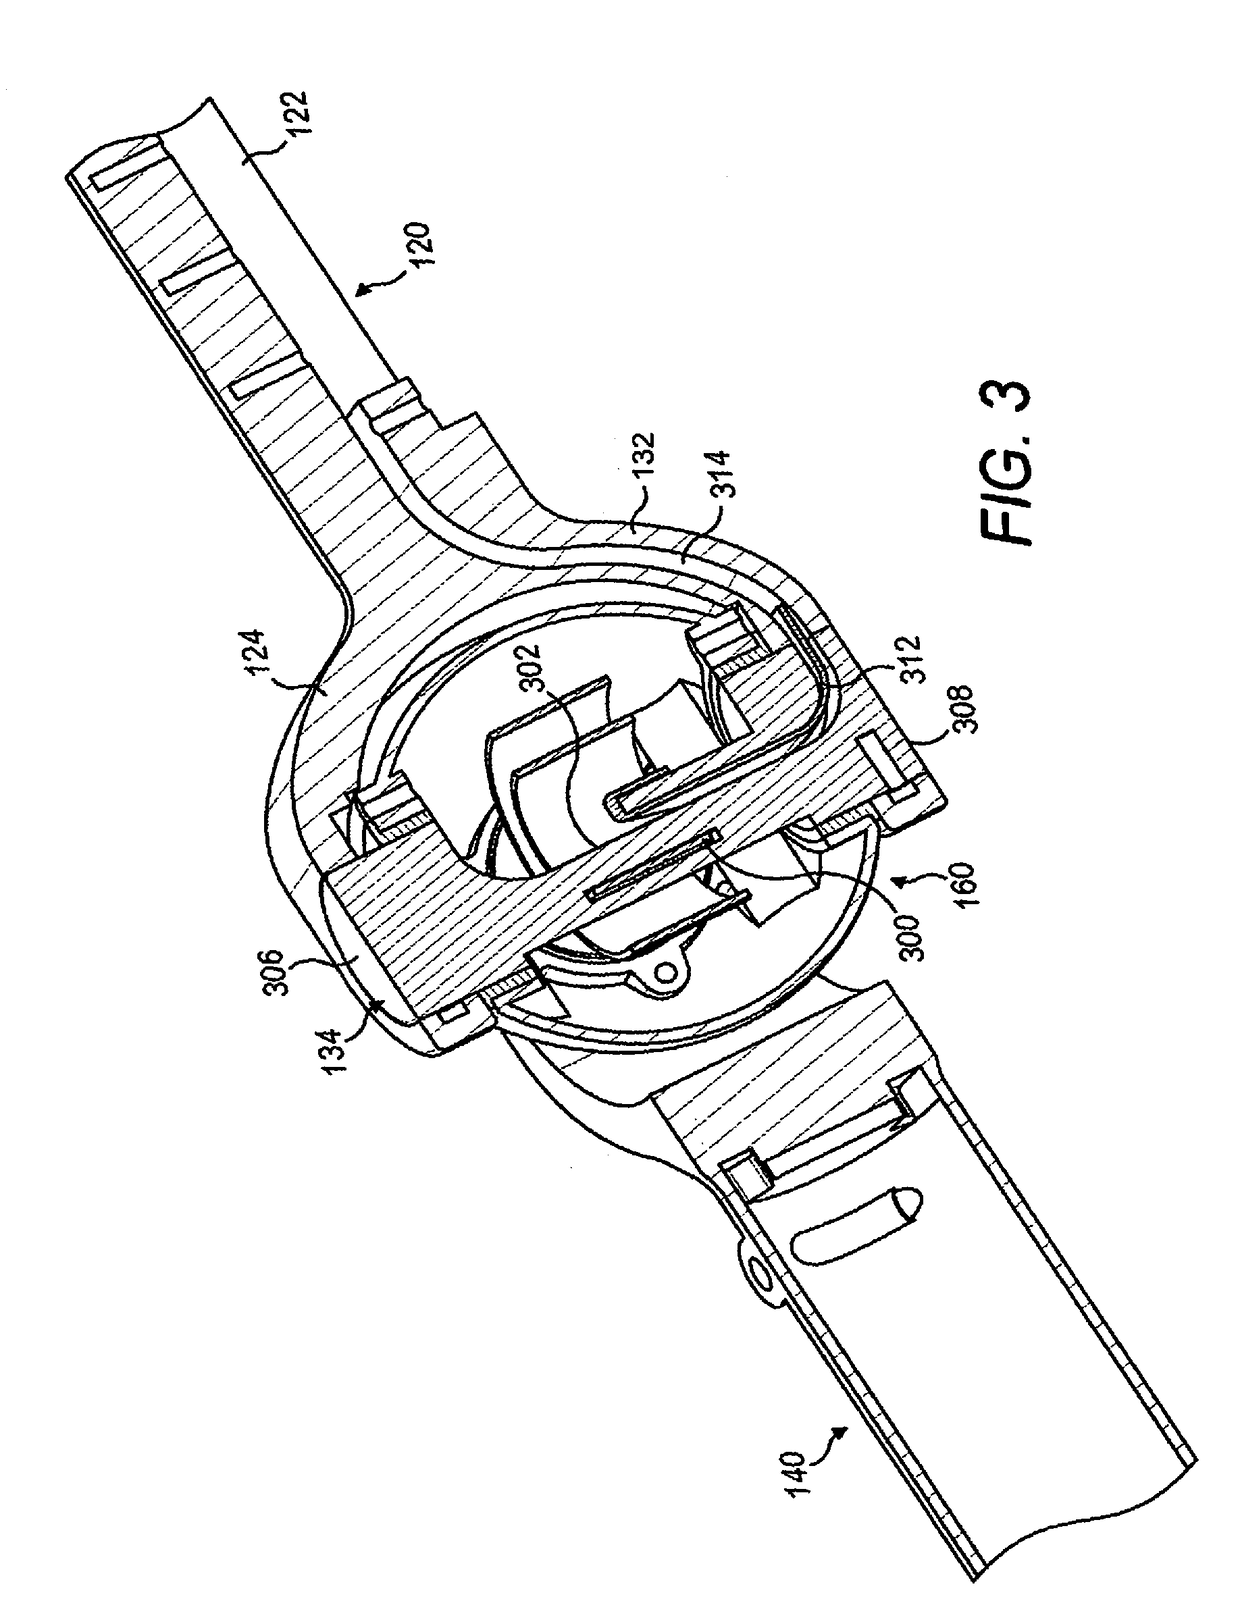 Mechanical link with single coil flexible member accommodating multiple-axis rotation